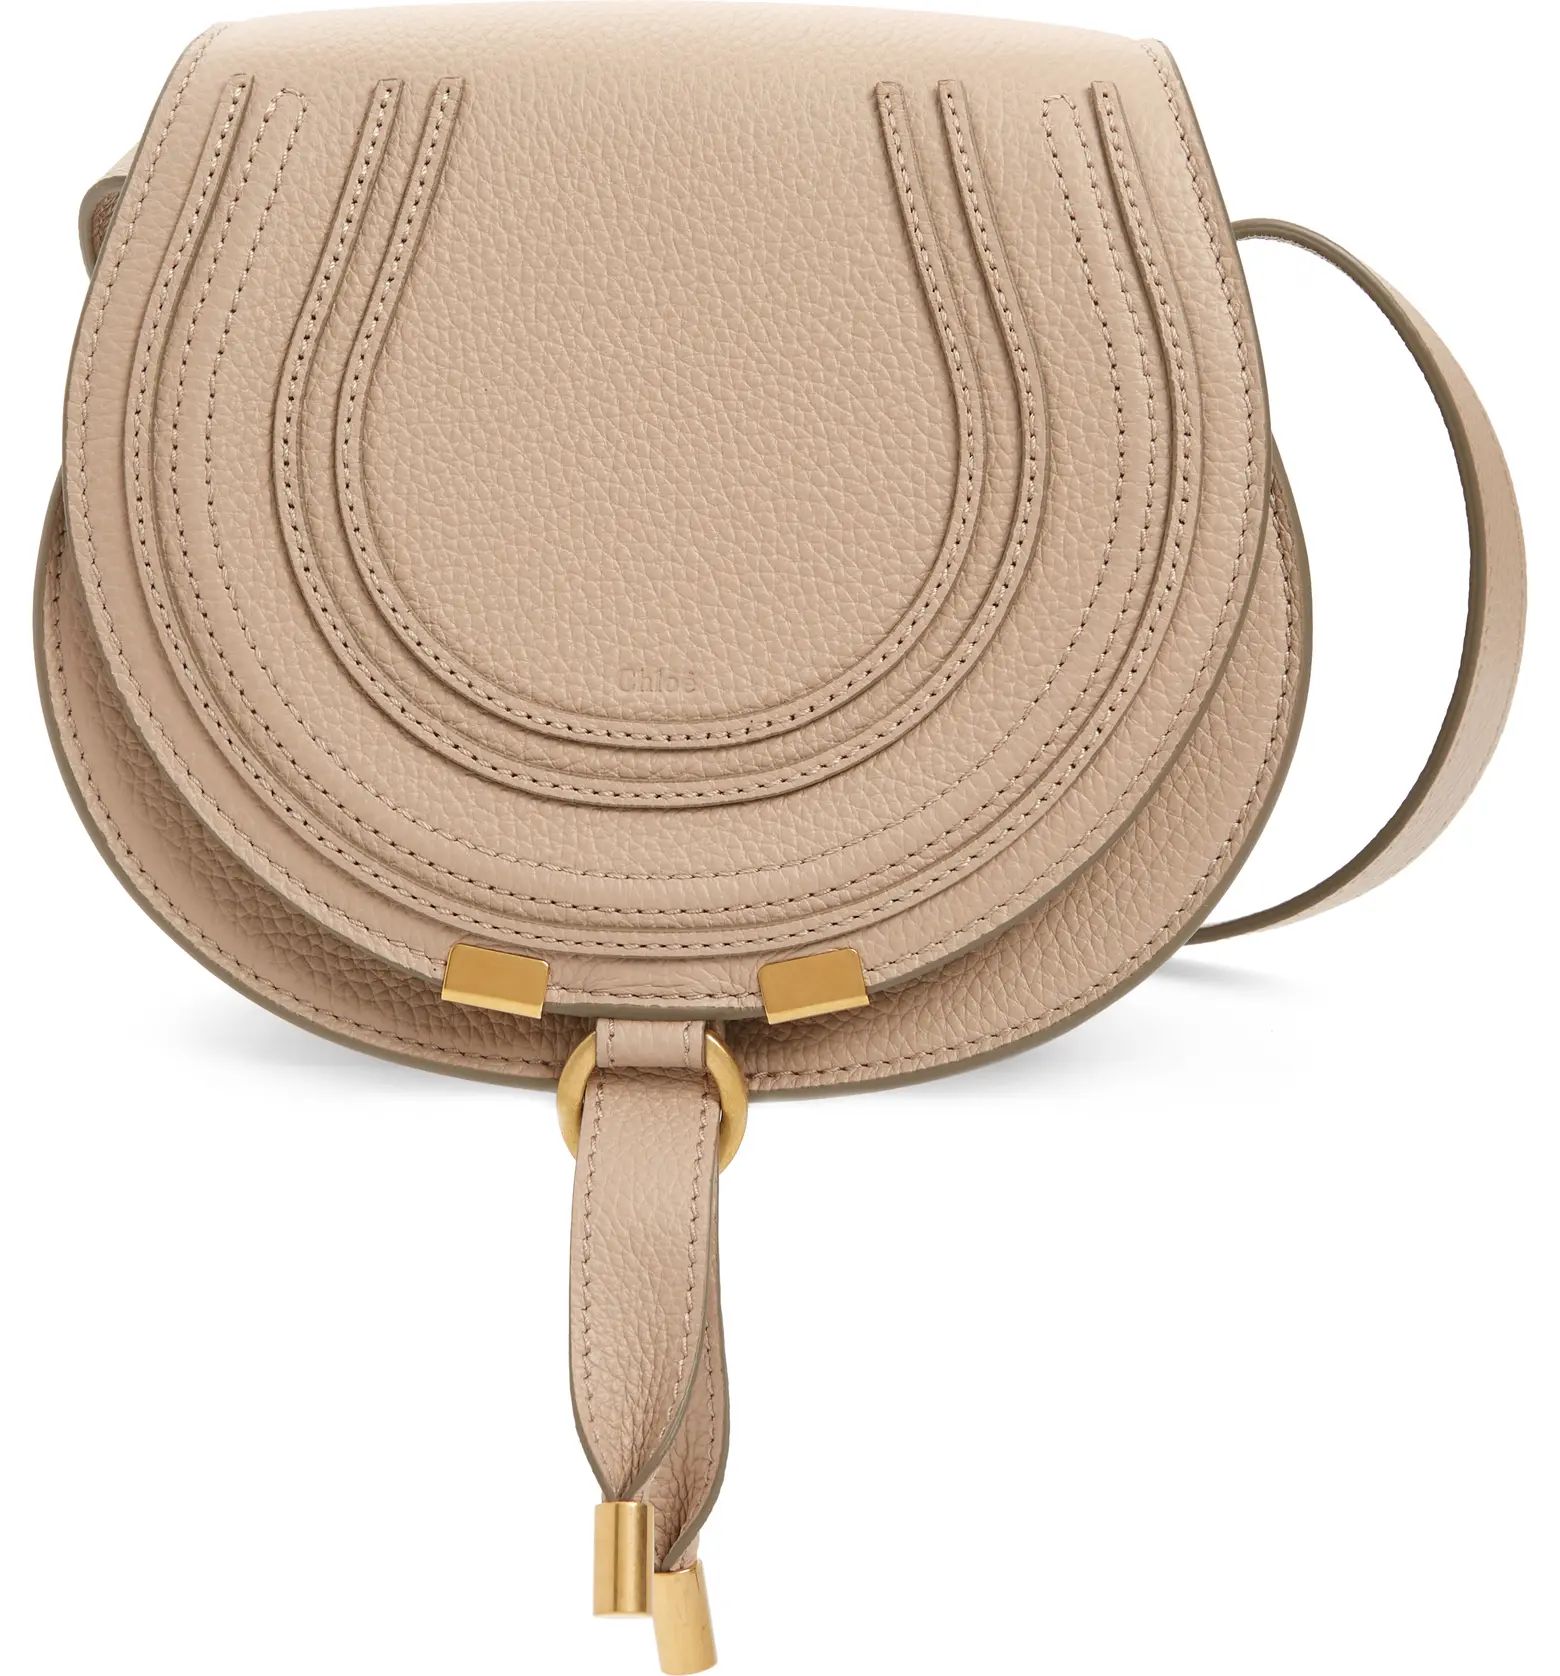 Mini Marcie Leather Crossbody BagCHLOÉ$1,350.00Current Price $1,350.00FREE SHIPPING Get a $40 B... | Nordstrom